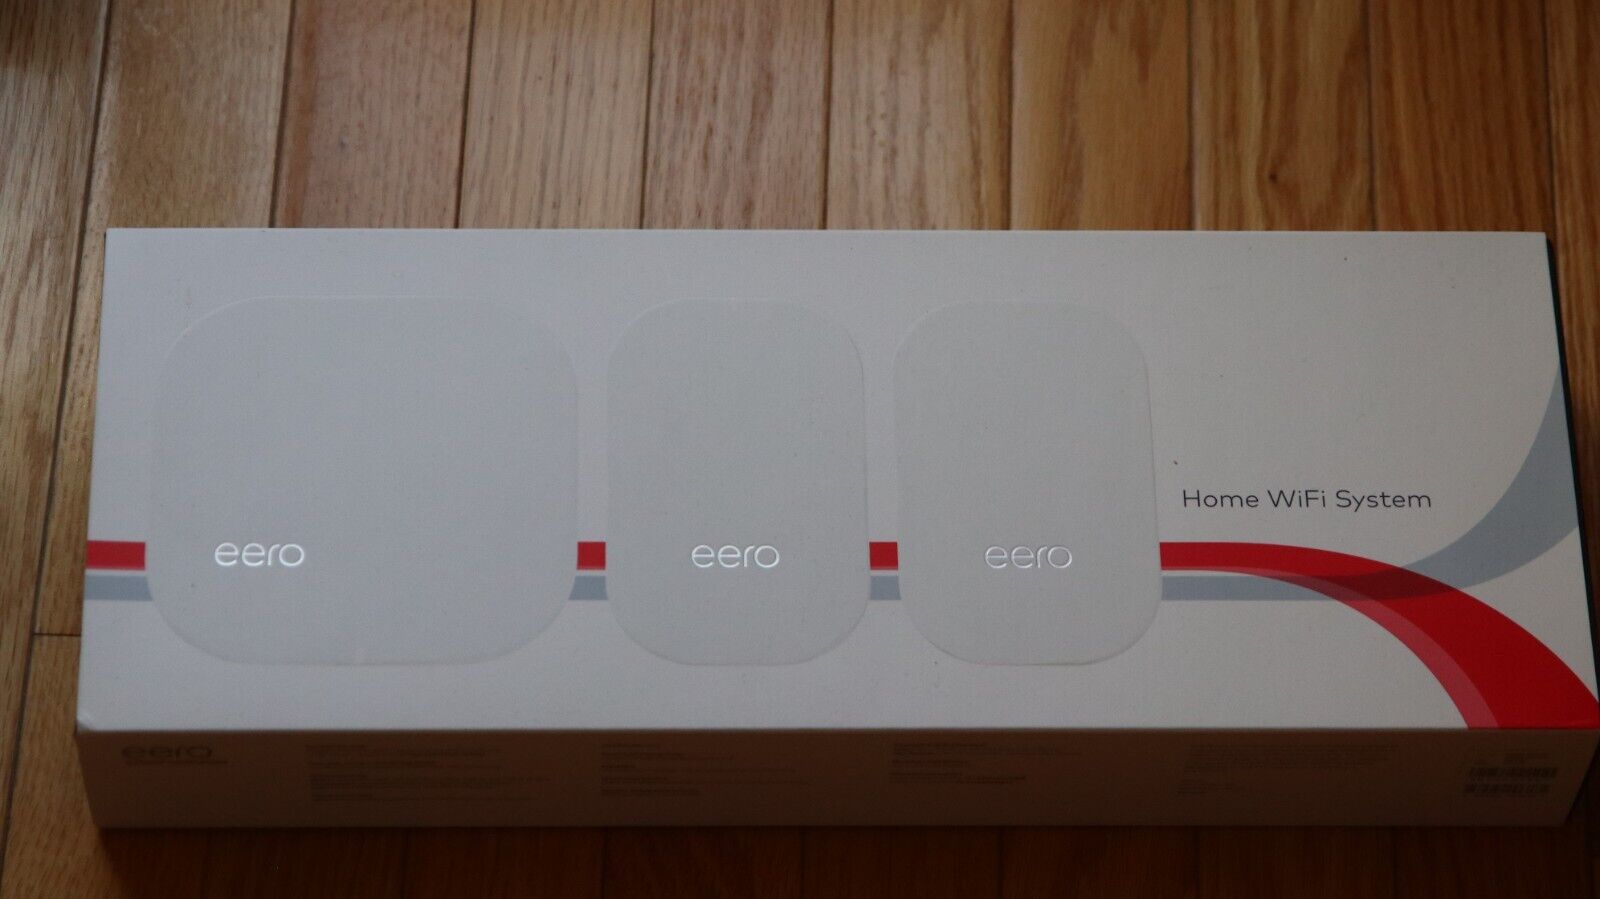 eero M010301 2nd Generation Home WiFi System